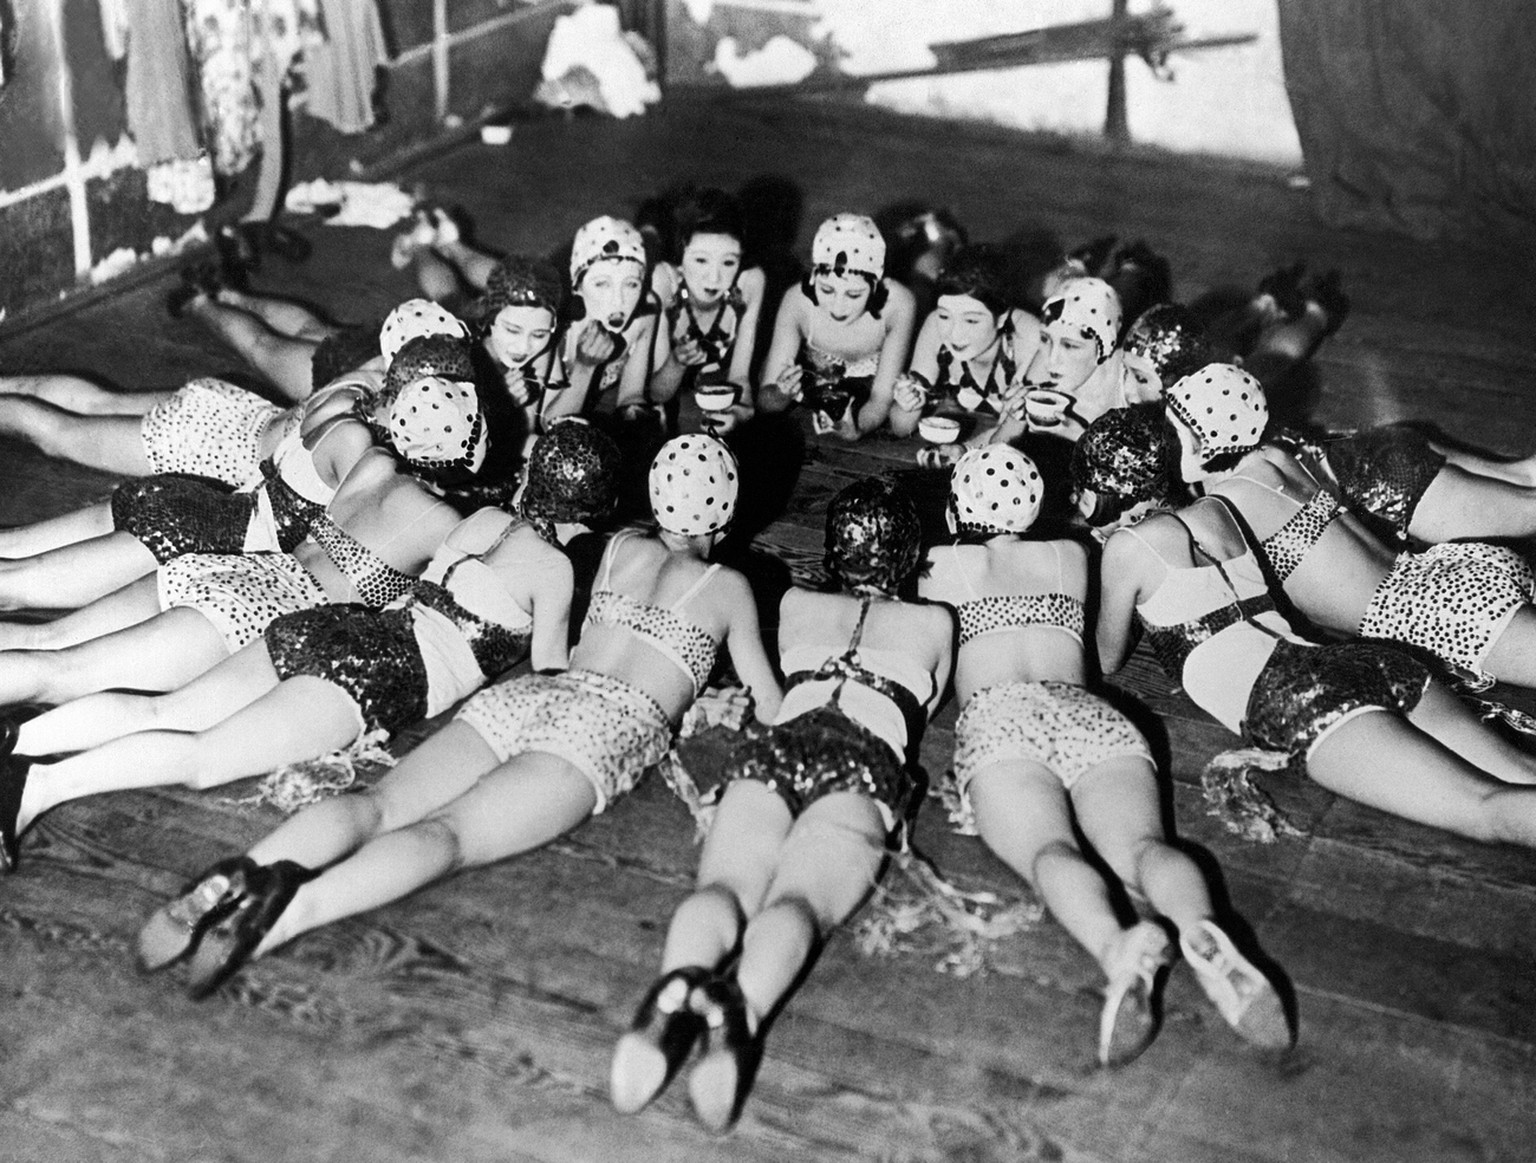 These Japanese chorus girls from a revue running at a Tokyo theater take a break for a moment behind stage to refresh themselves with iced drinks, Aug. 27, 1932. (AP Photo)